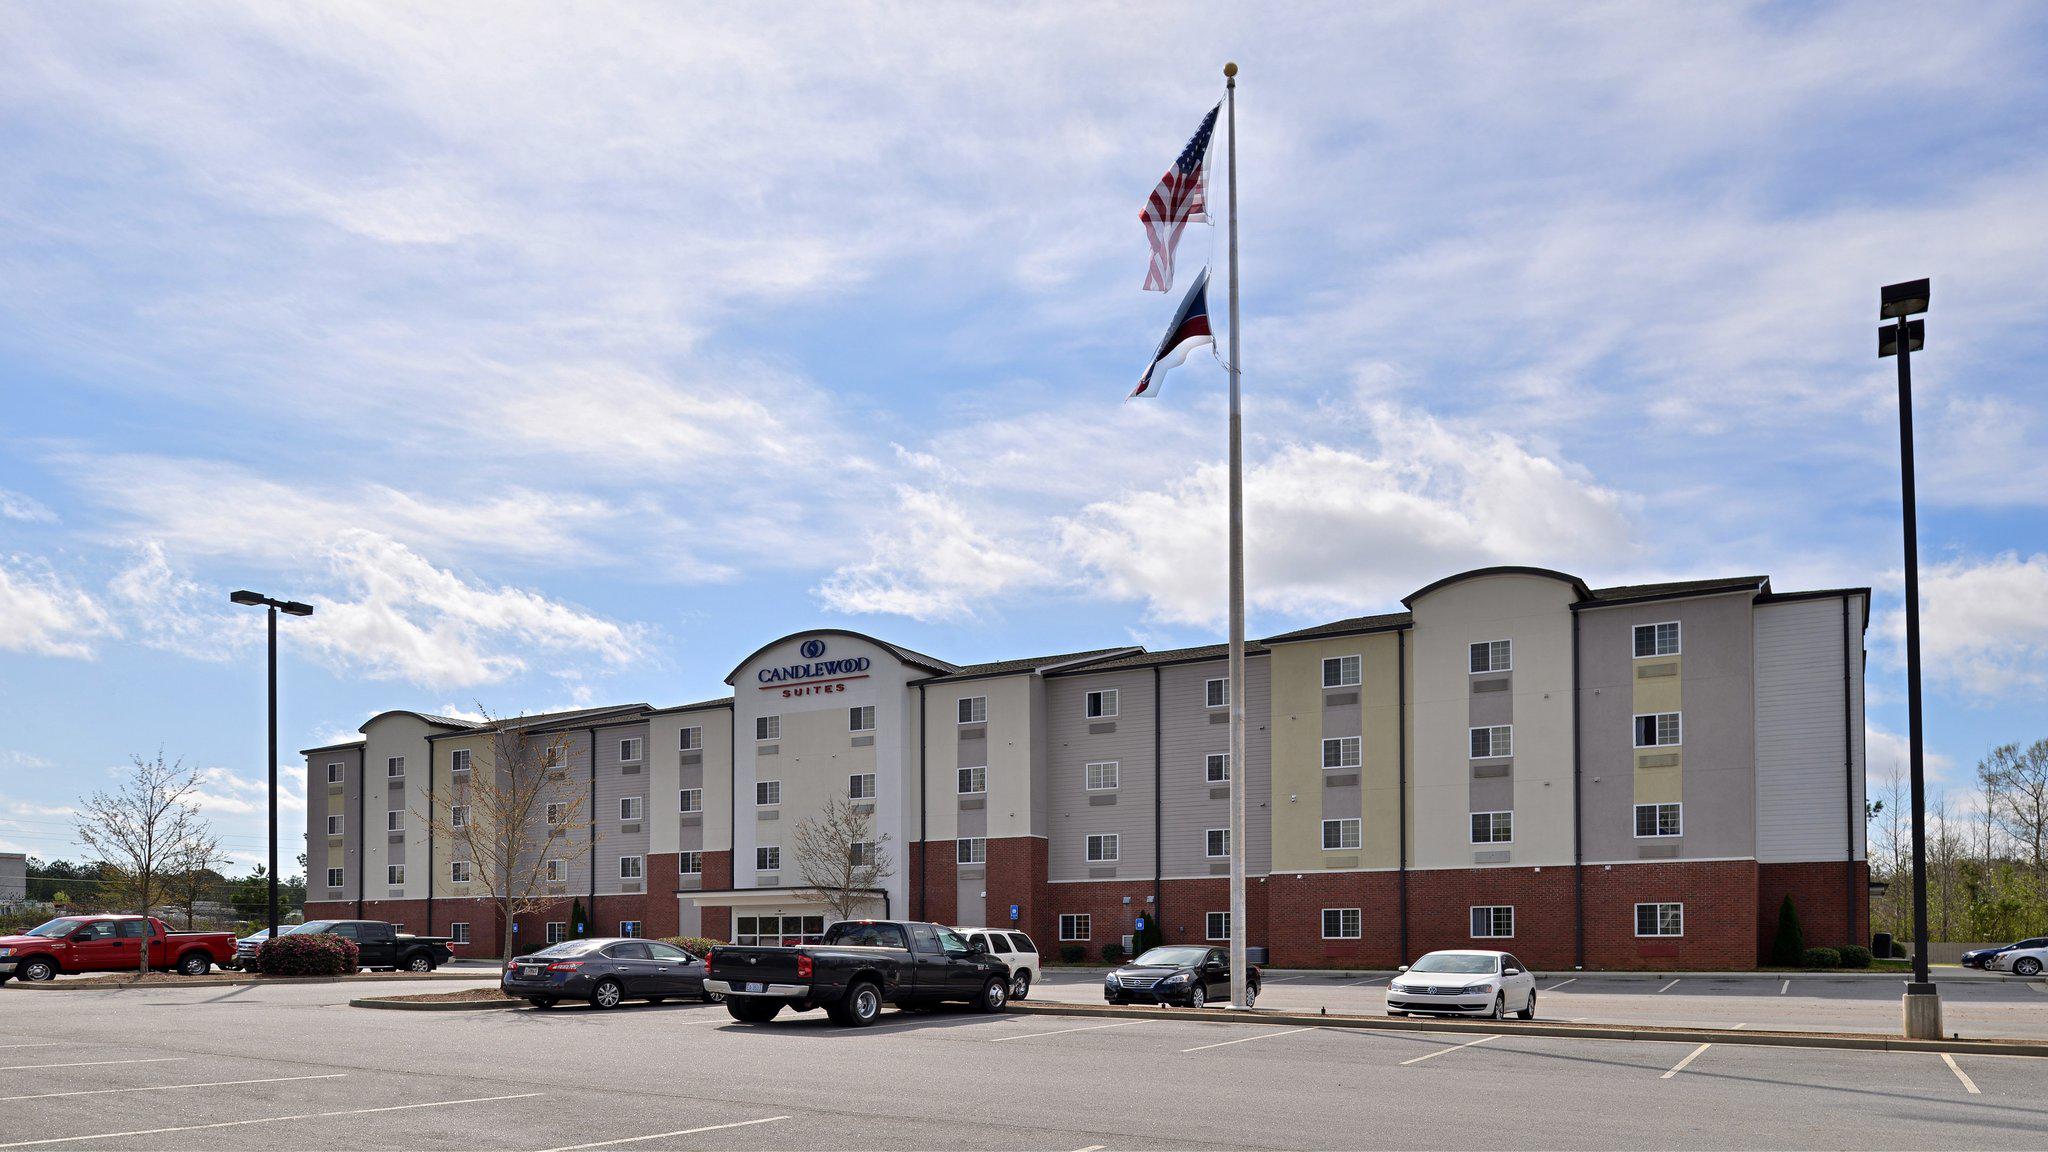 Candlewood Suites Athens Photo